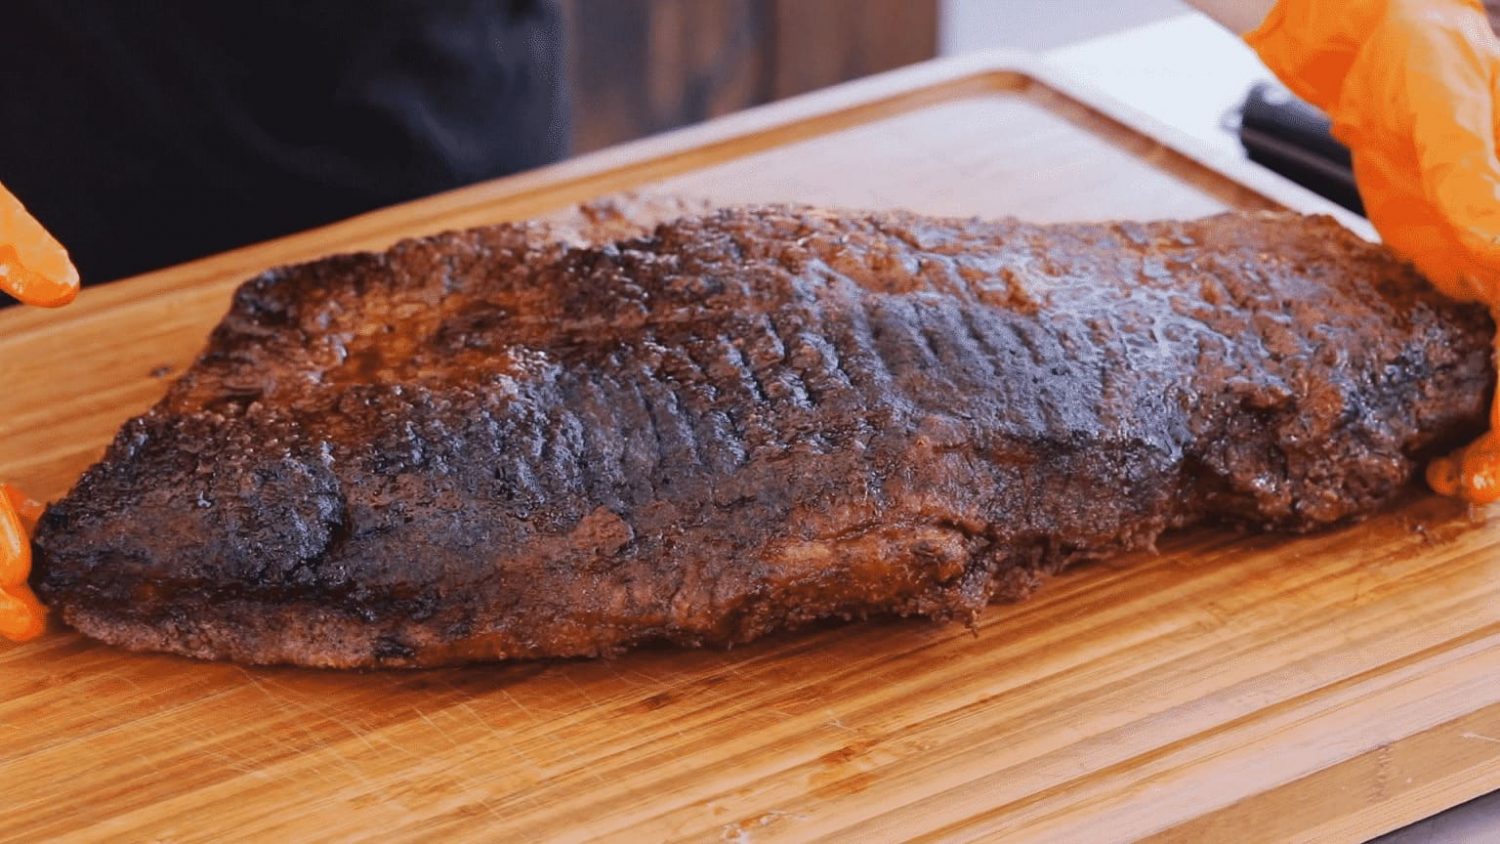 Speedy and Savory: Hot and Fast Brisket on the Smoker